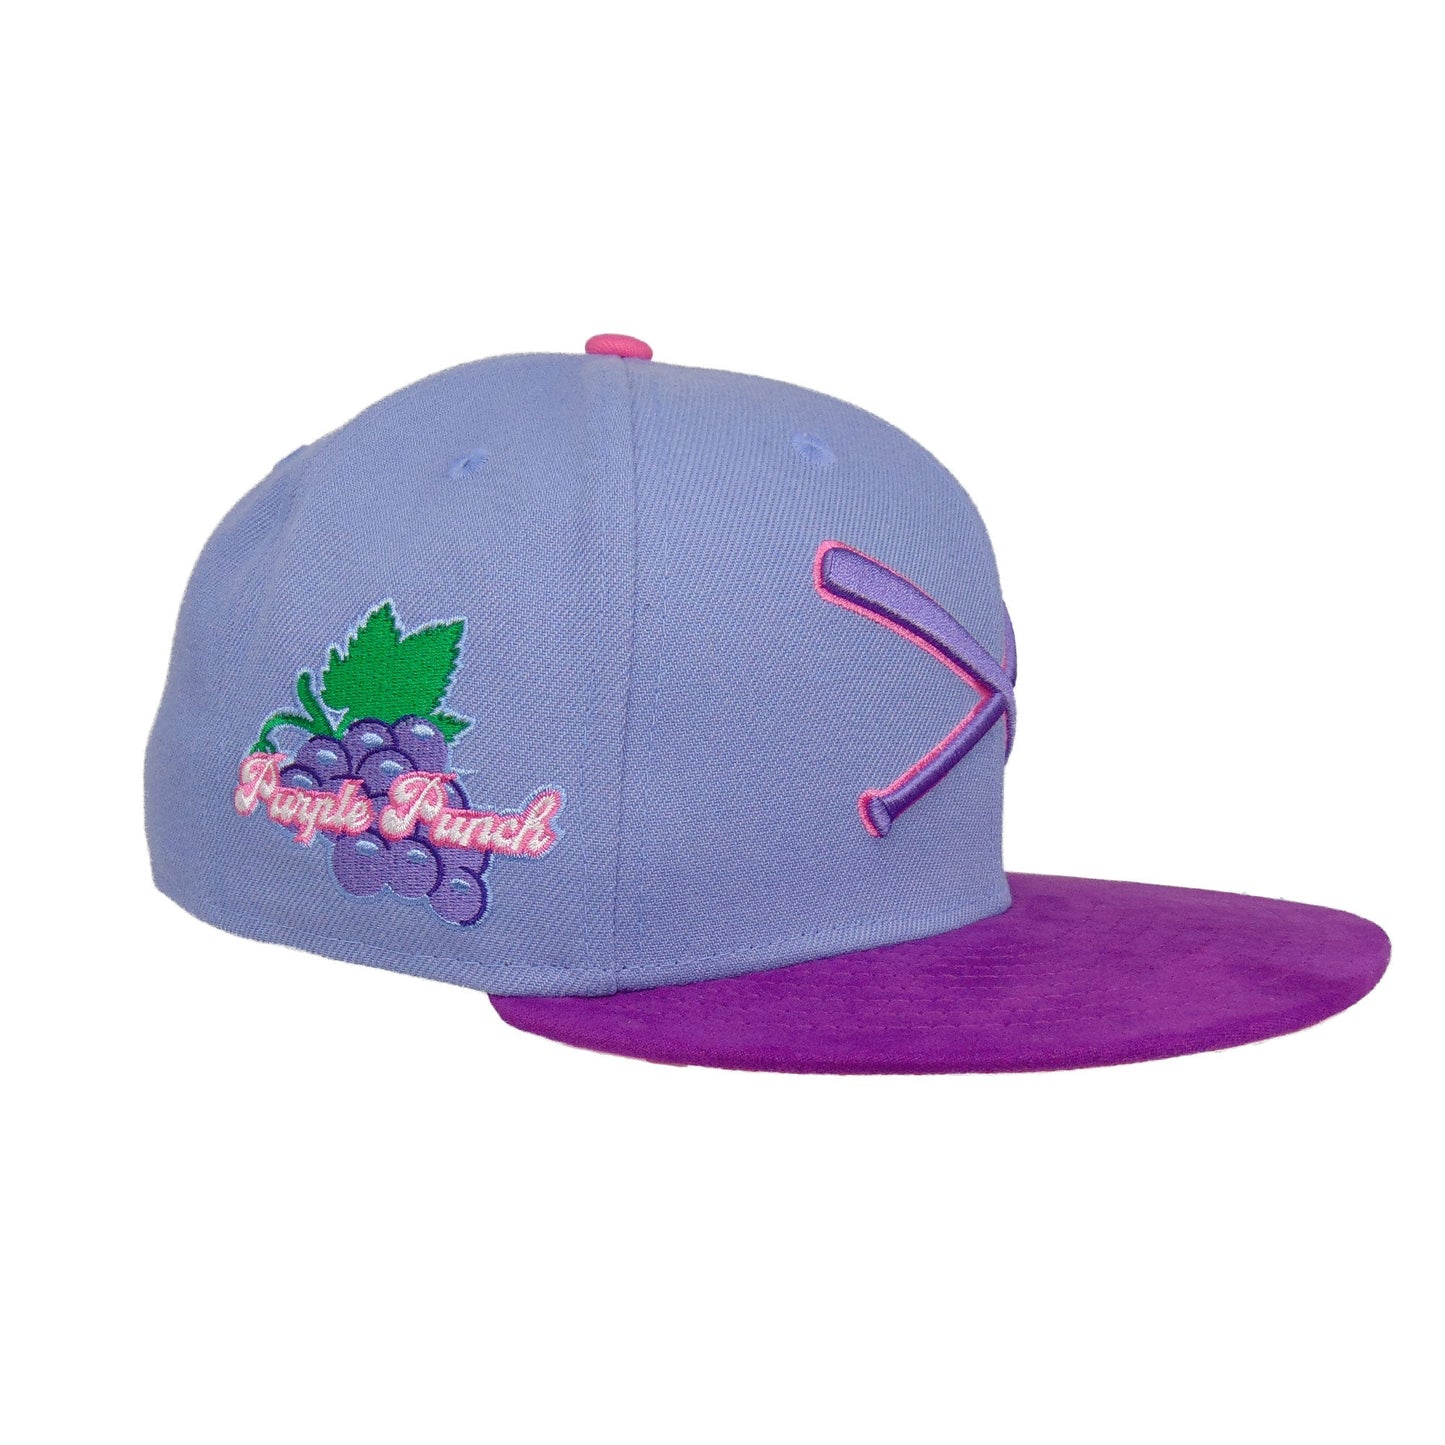 JustFitteds Crossed Bats New Era 59FIFTY Cap Purple Punch